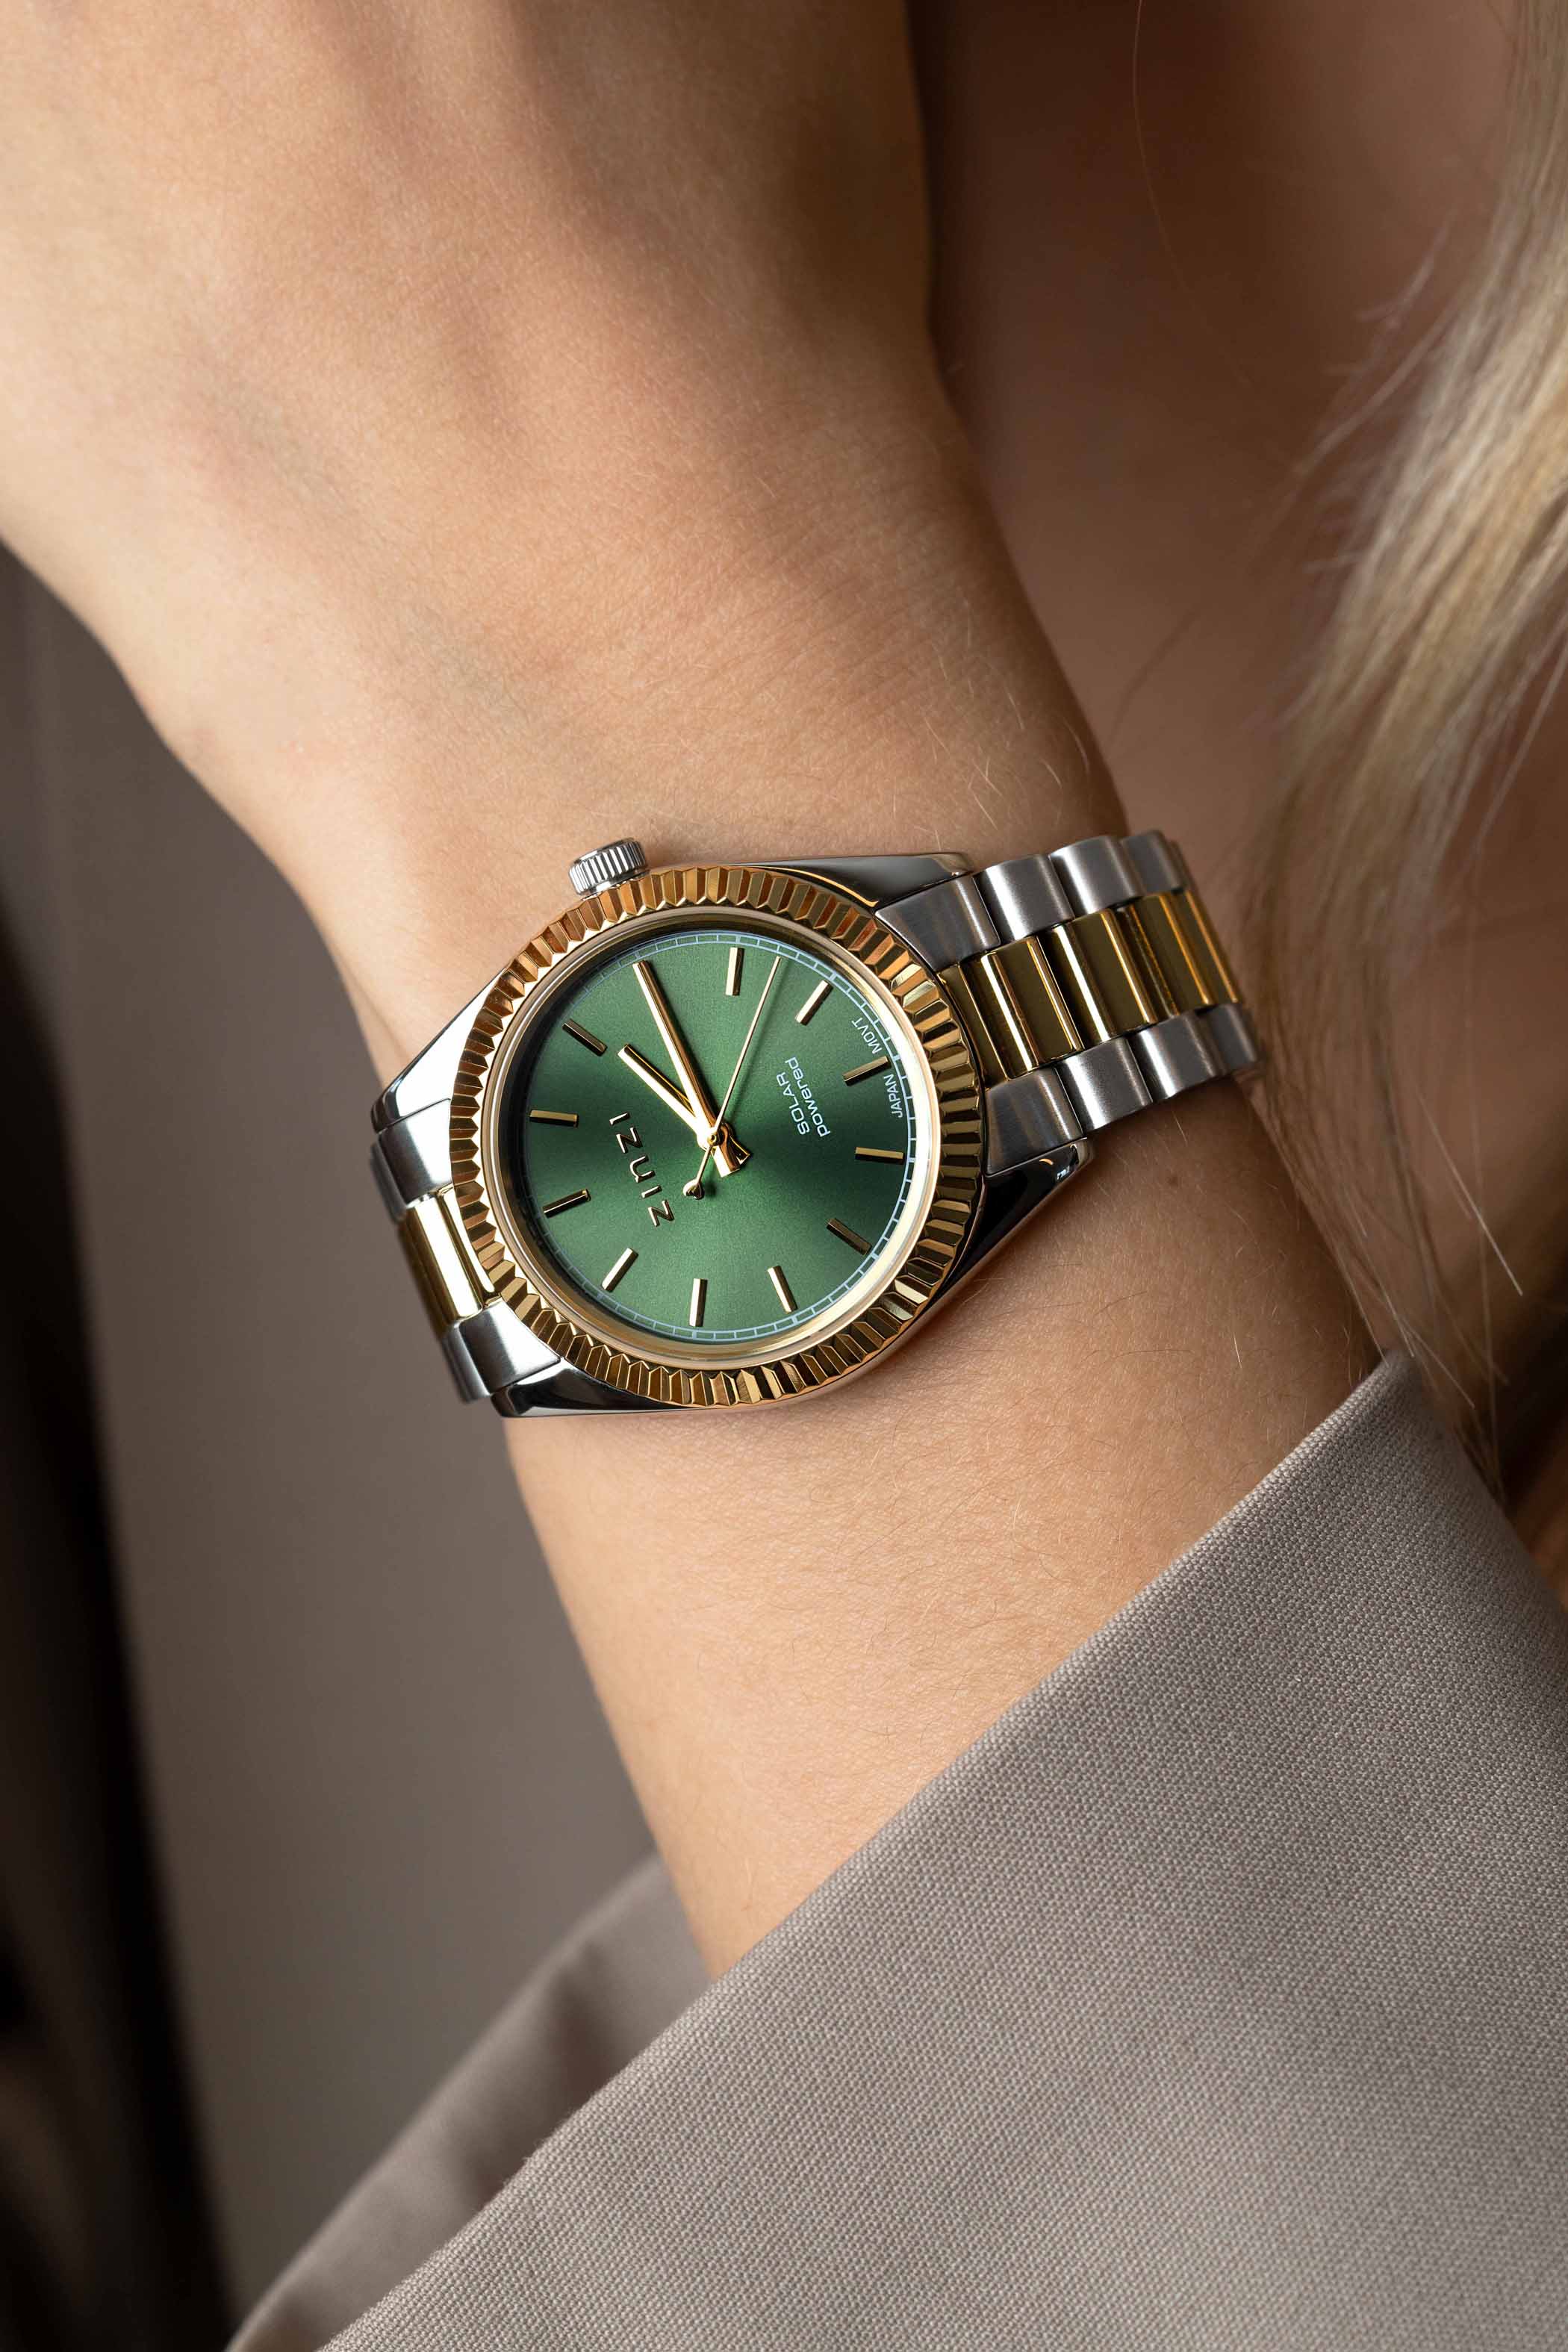 ZINZI Solaris Watch 35mm Green Dial Bicolor Case and Chain Strap (works on sun- and artificial light) ZIW2135